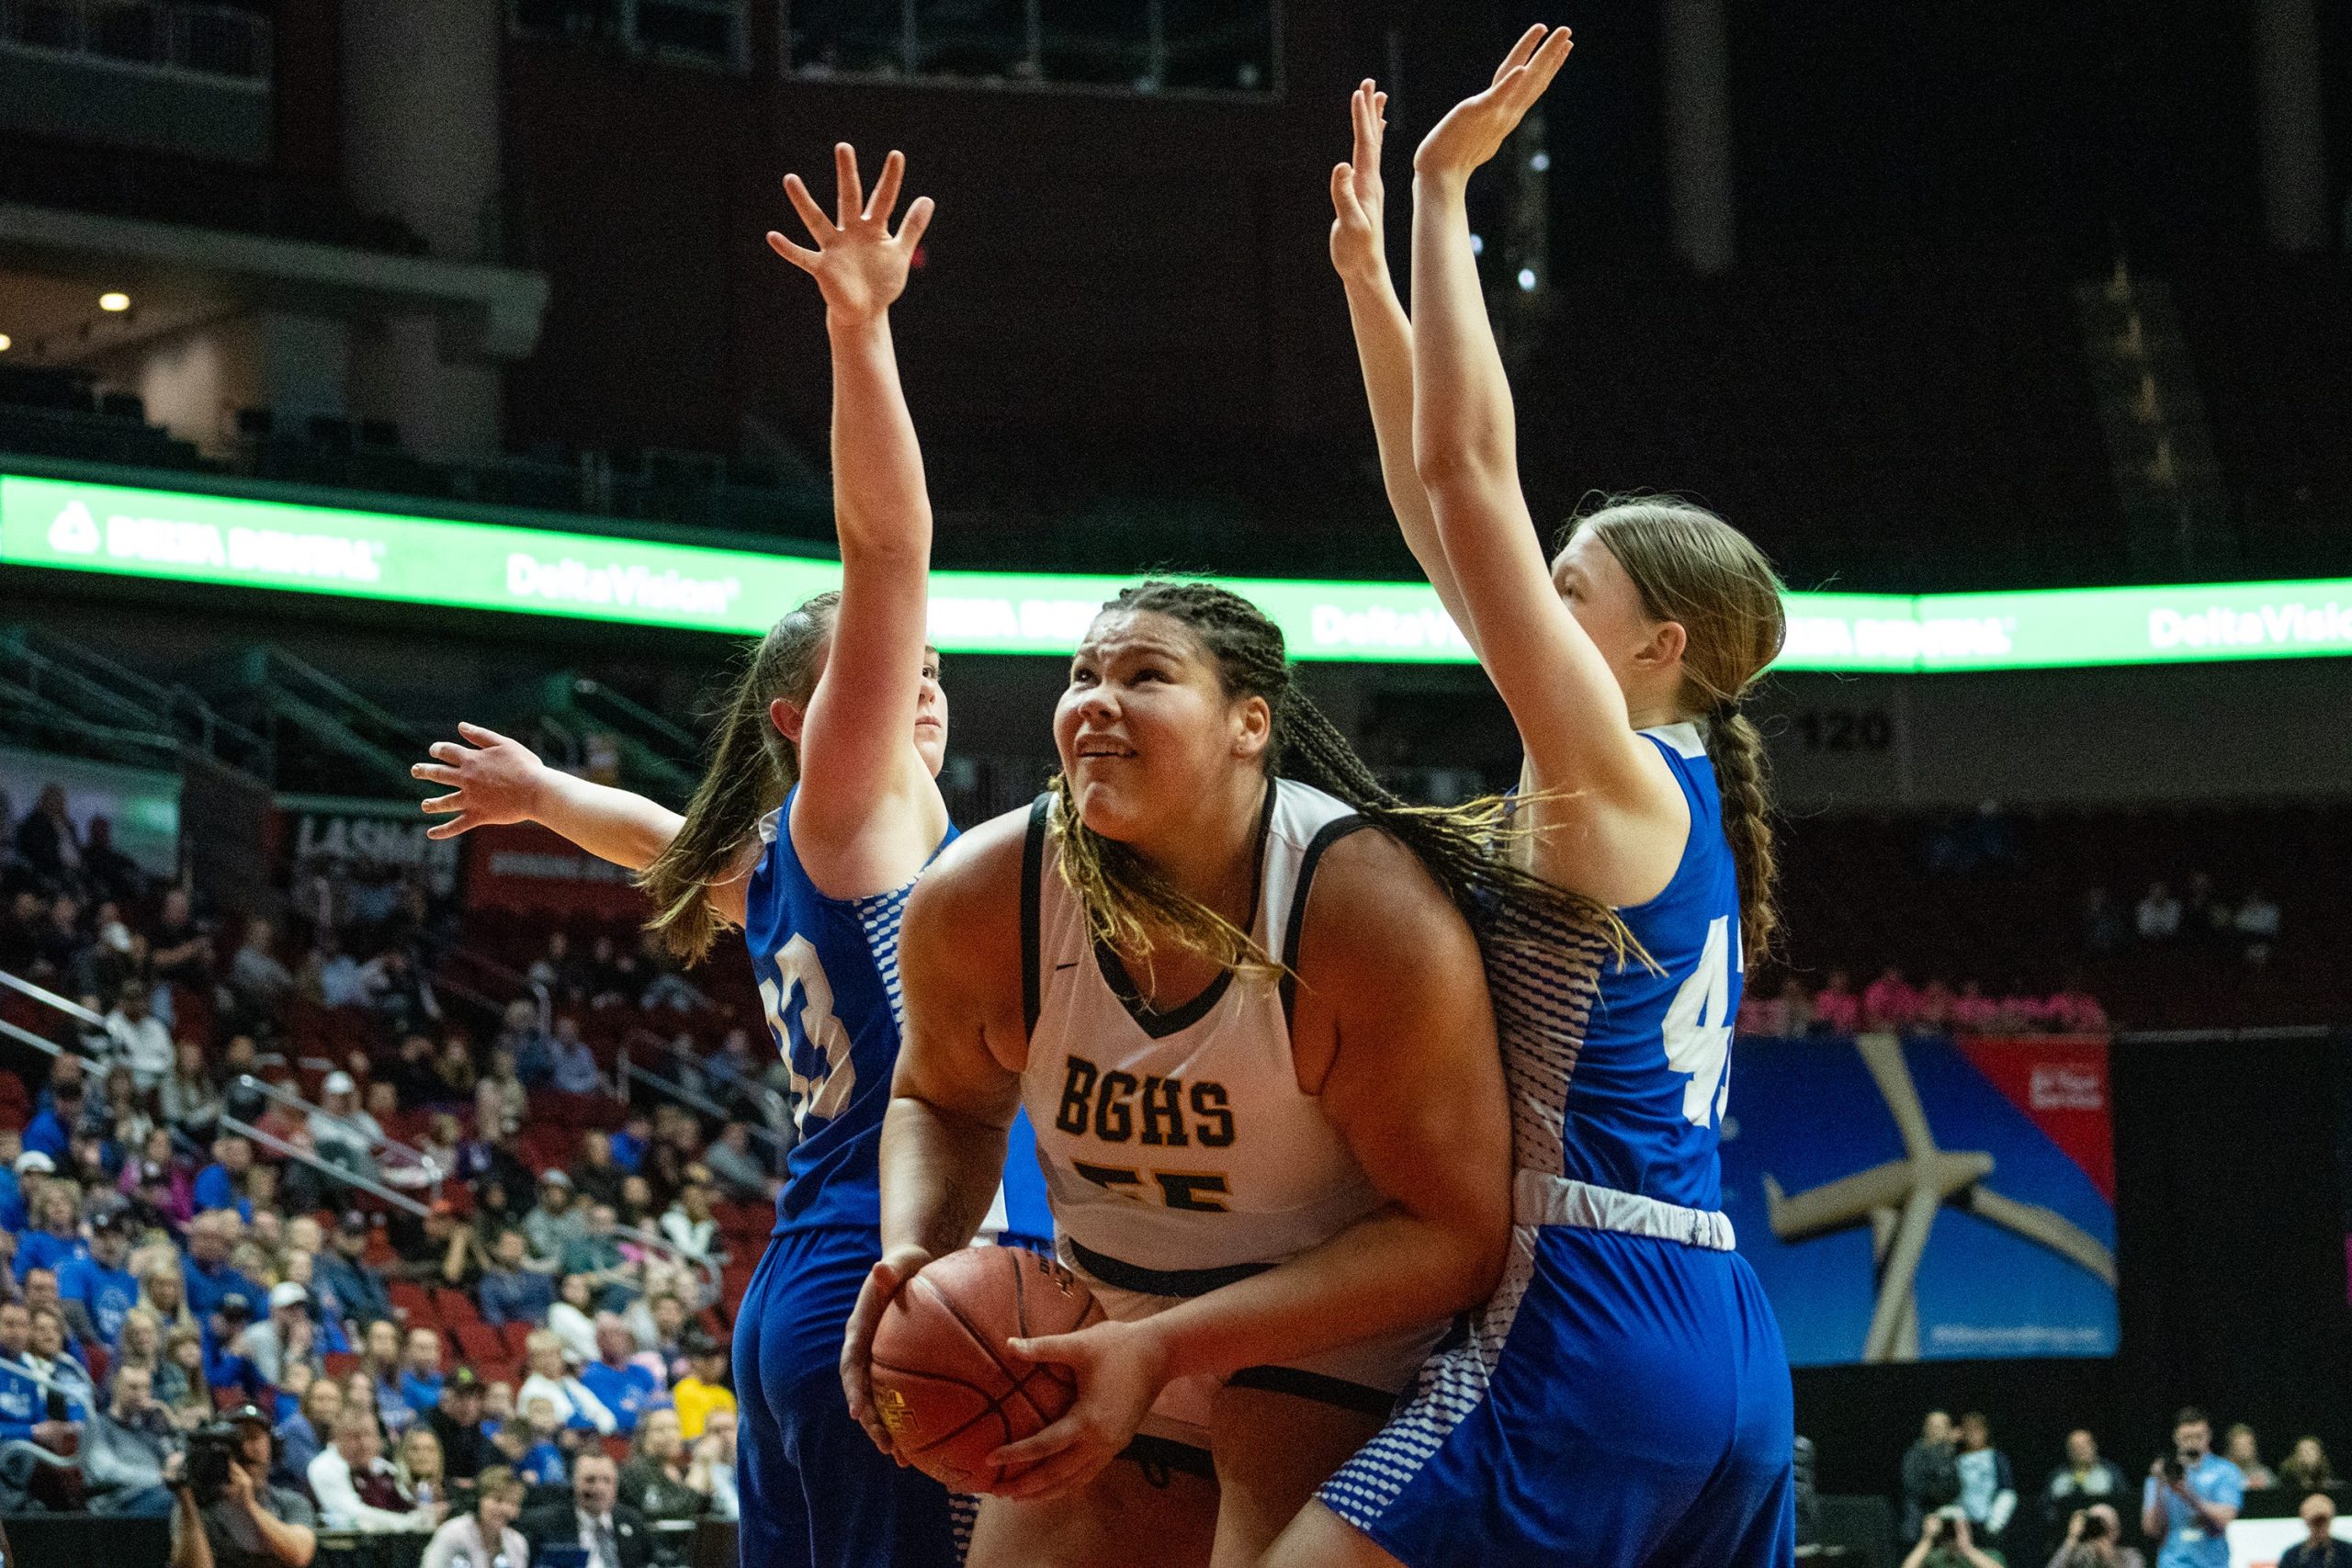 WBB: Iowa State signee Audi Crooks breaks state record with 49 points in title game